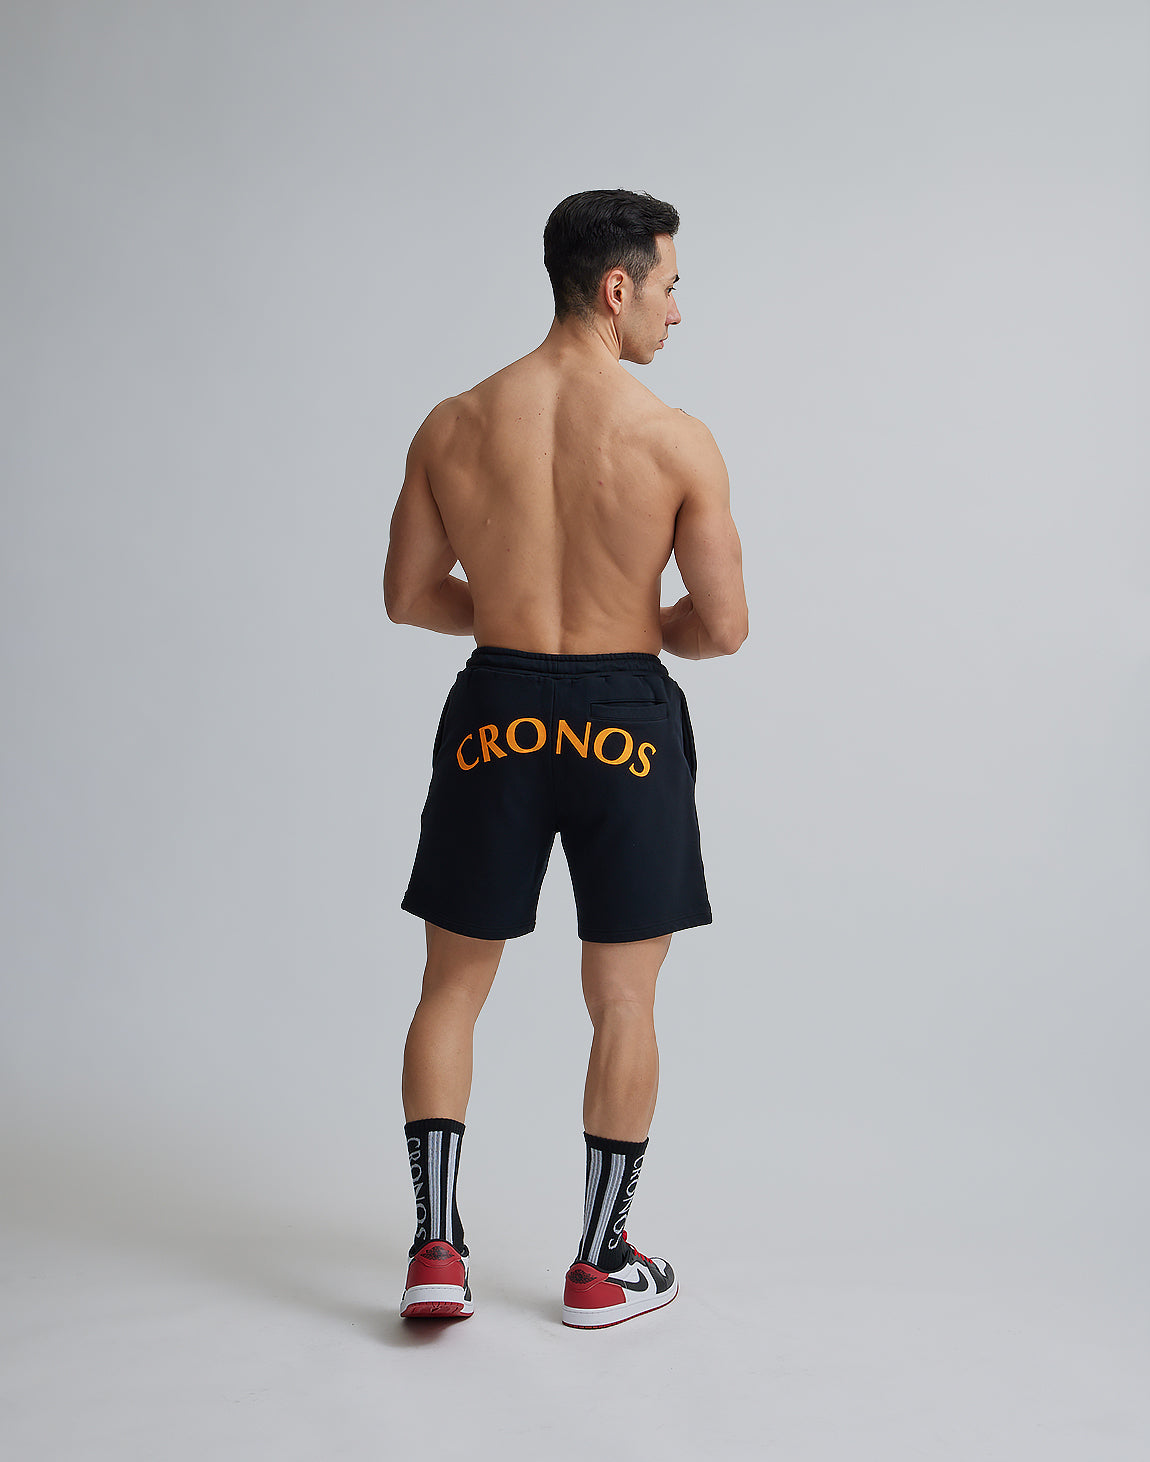 CRONOS PIGMENTED SHORTS – クロノス CRONOS Official Store